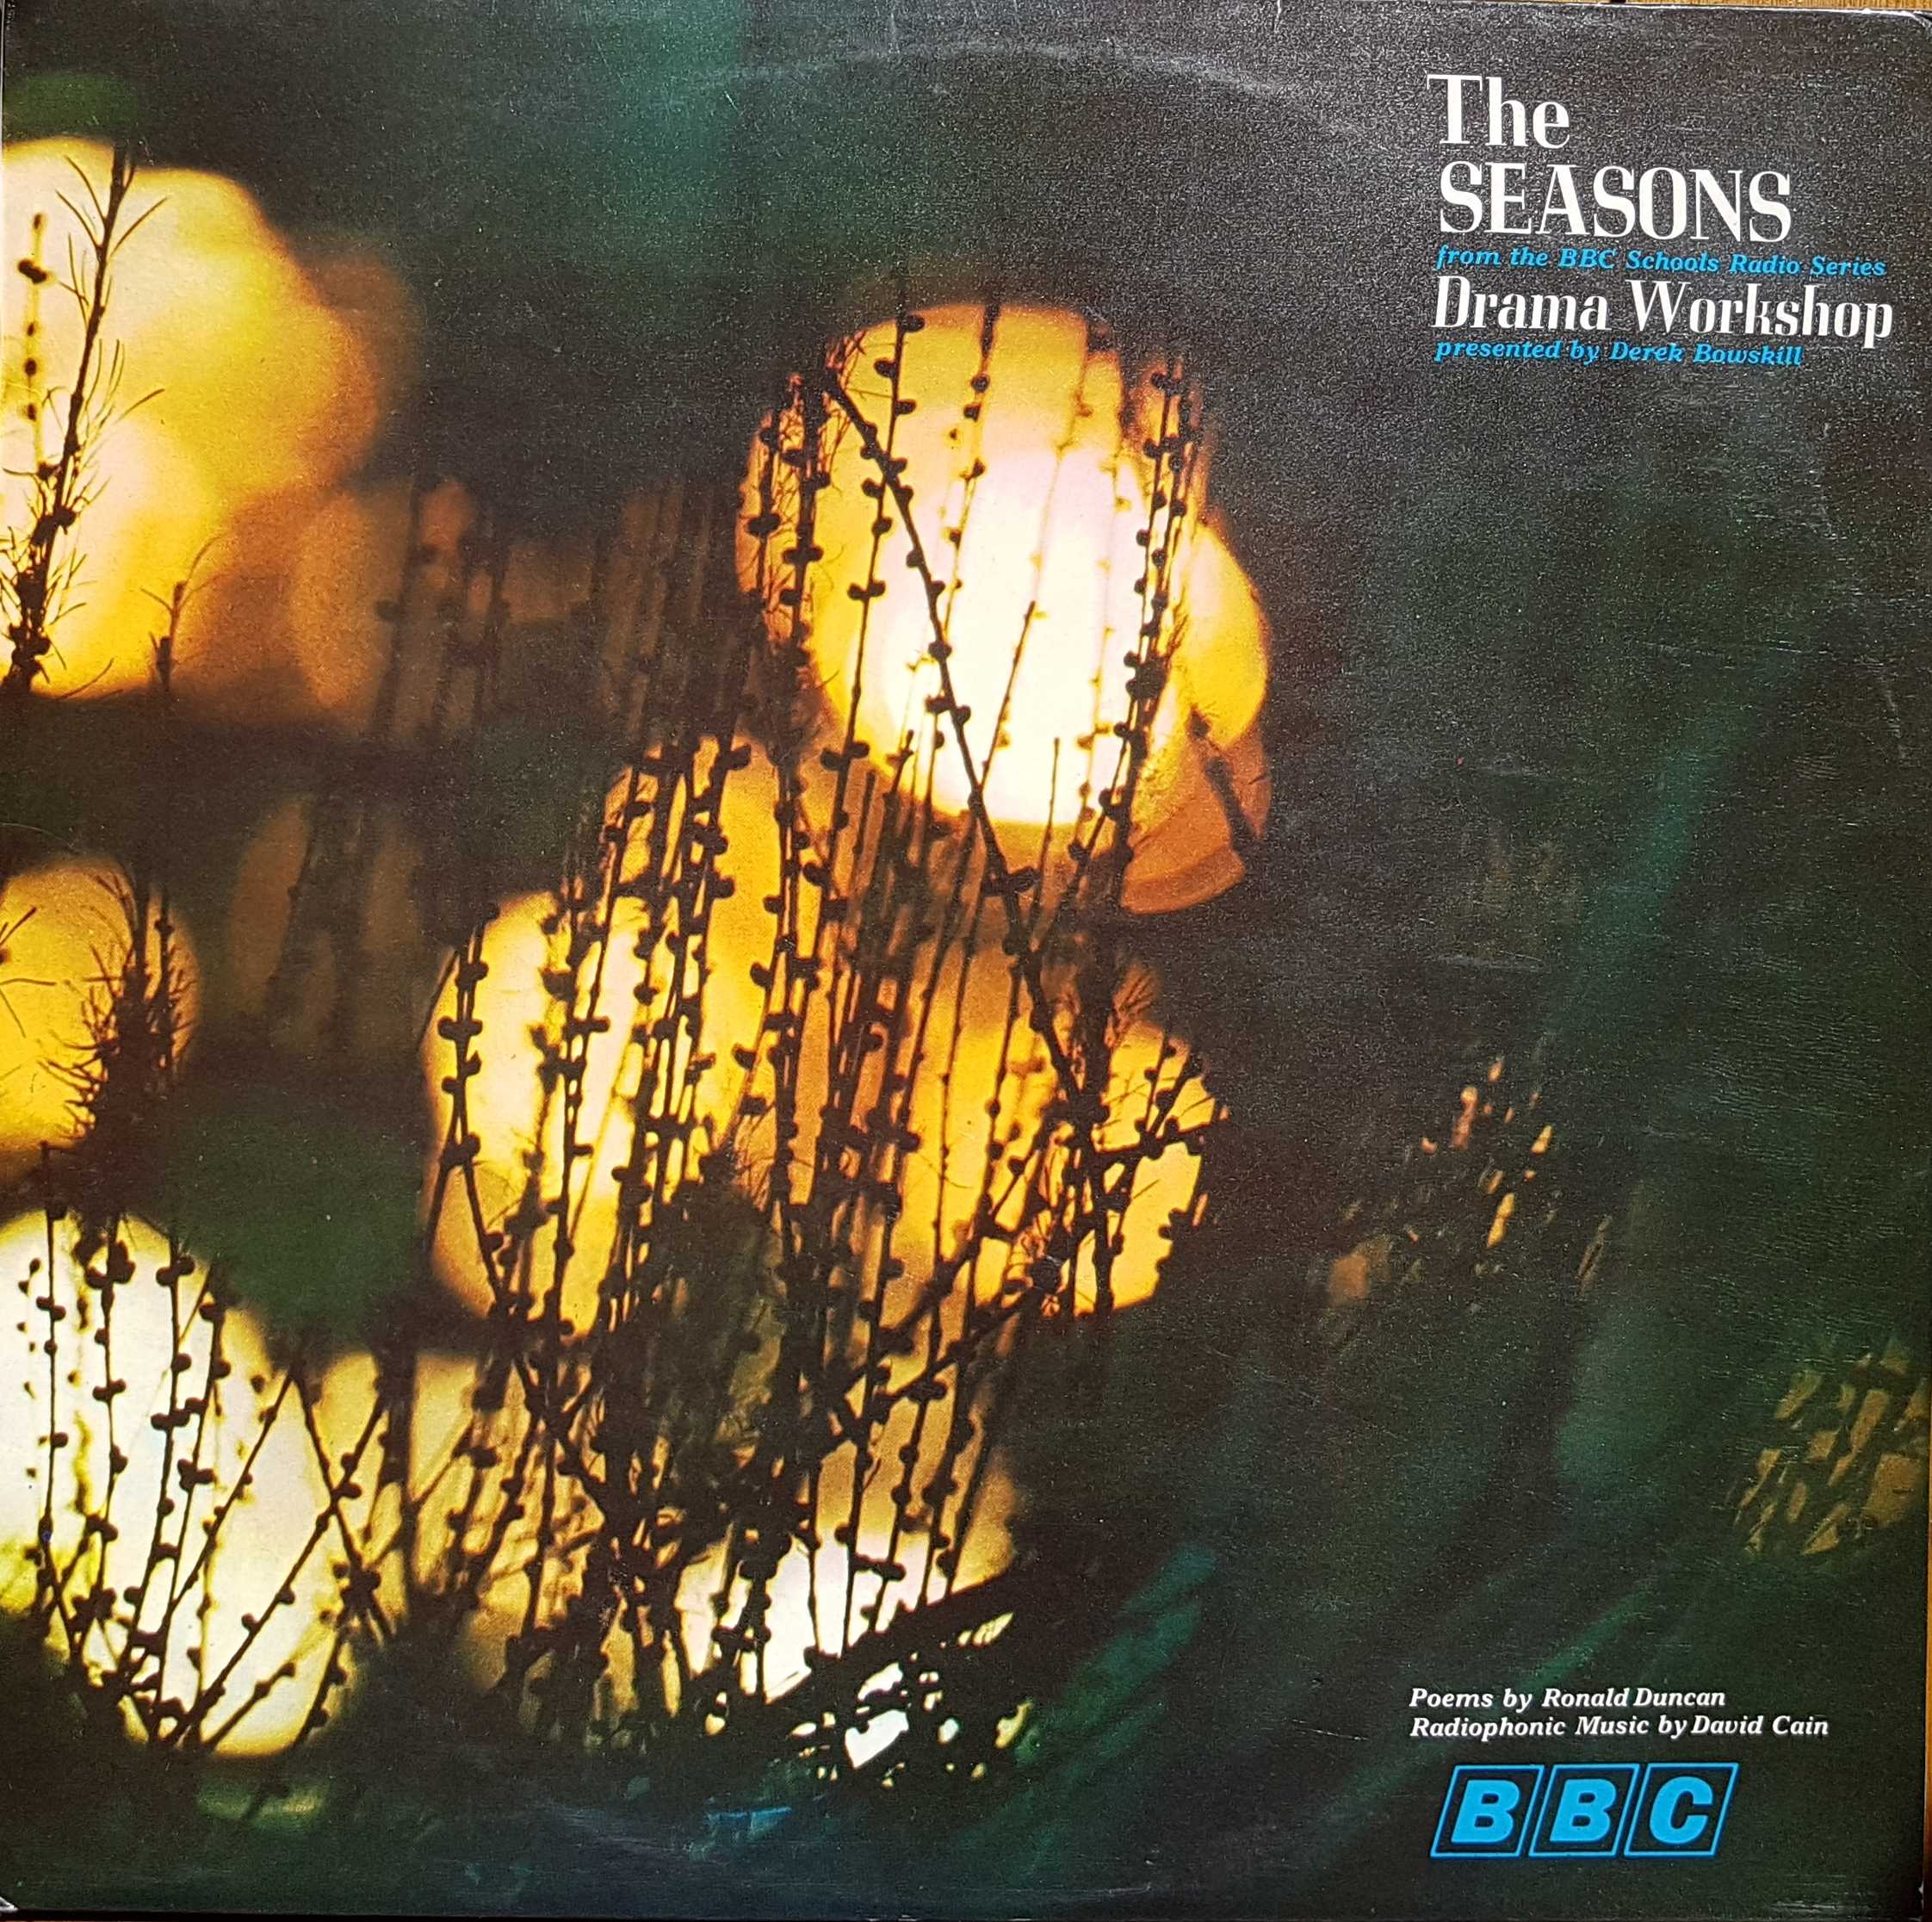 Picture of RESR 7 The seasons - Drama workshop by artist Derek Bowskill from the BBC albums - Records and Tapes library